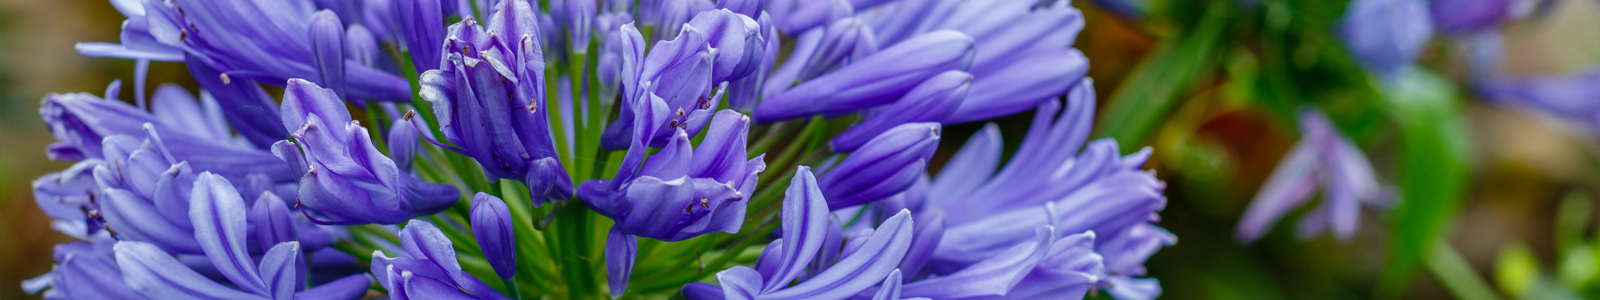 Agapanthus page banner